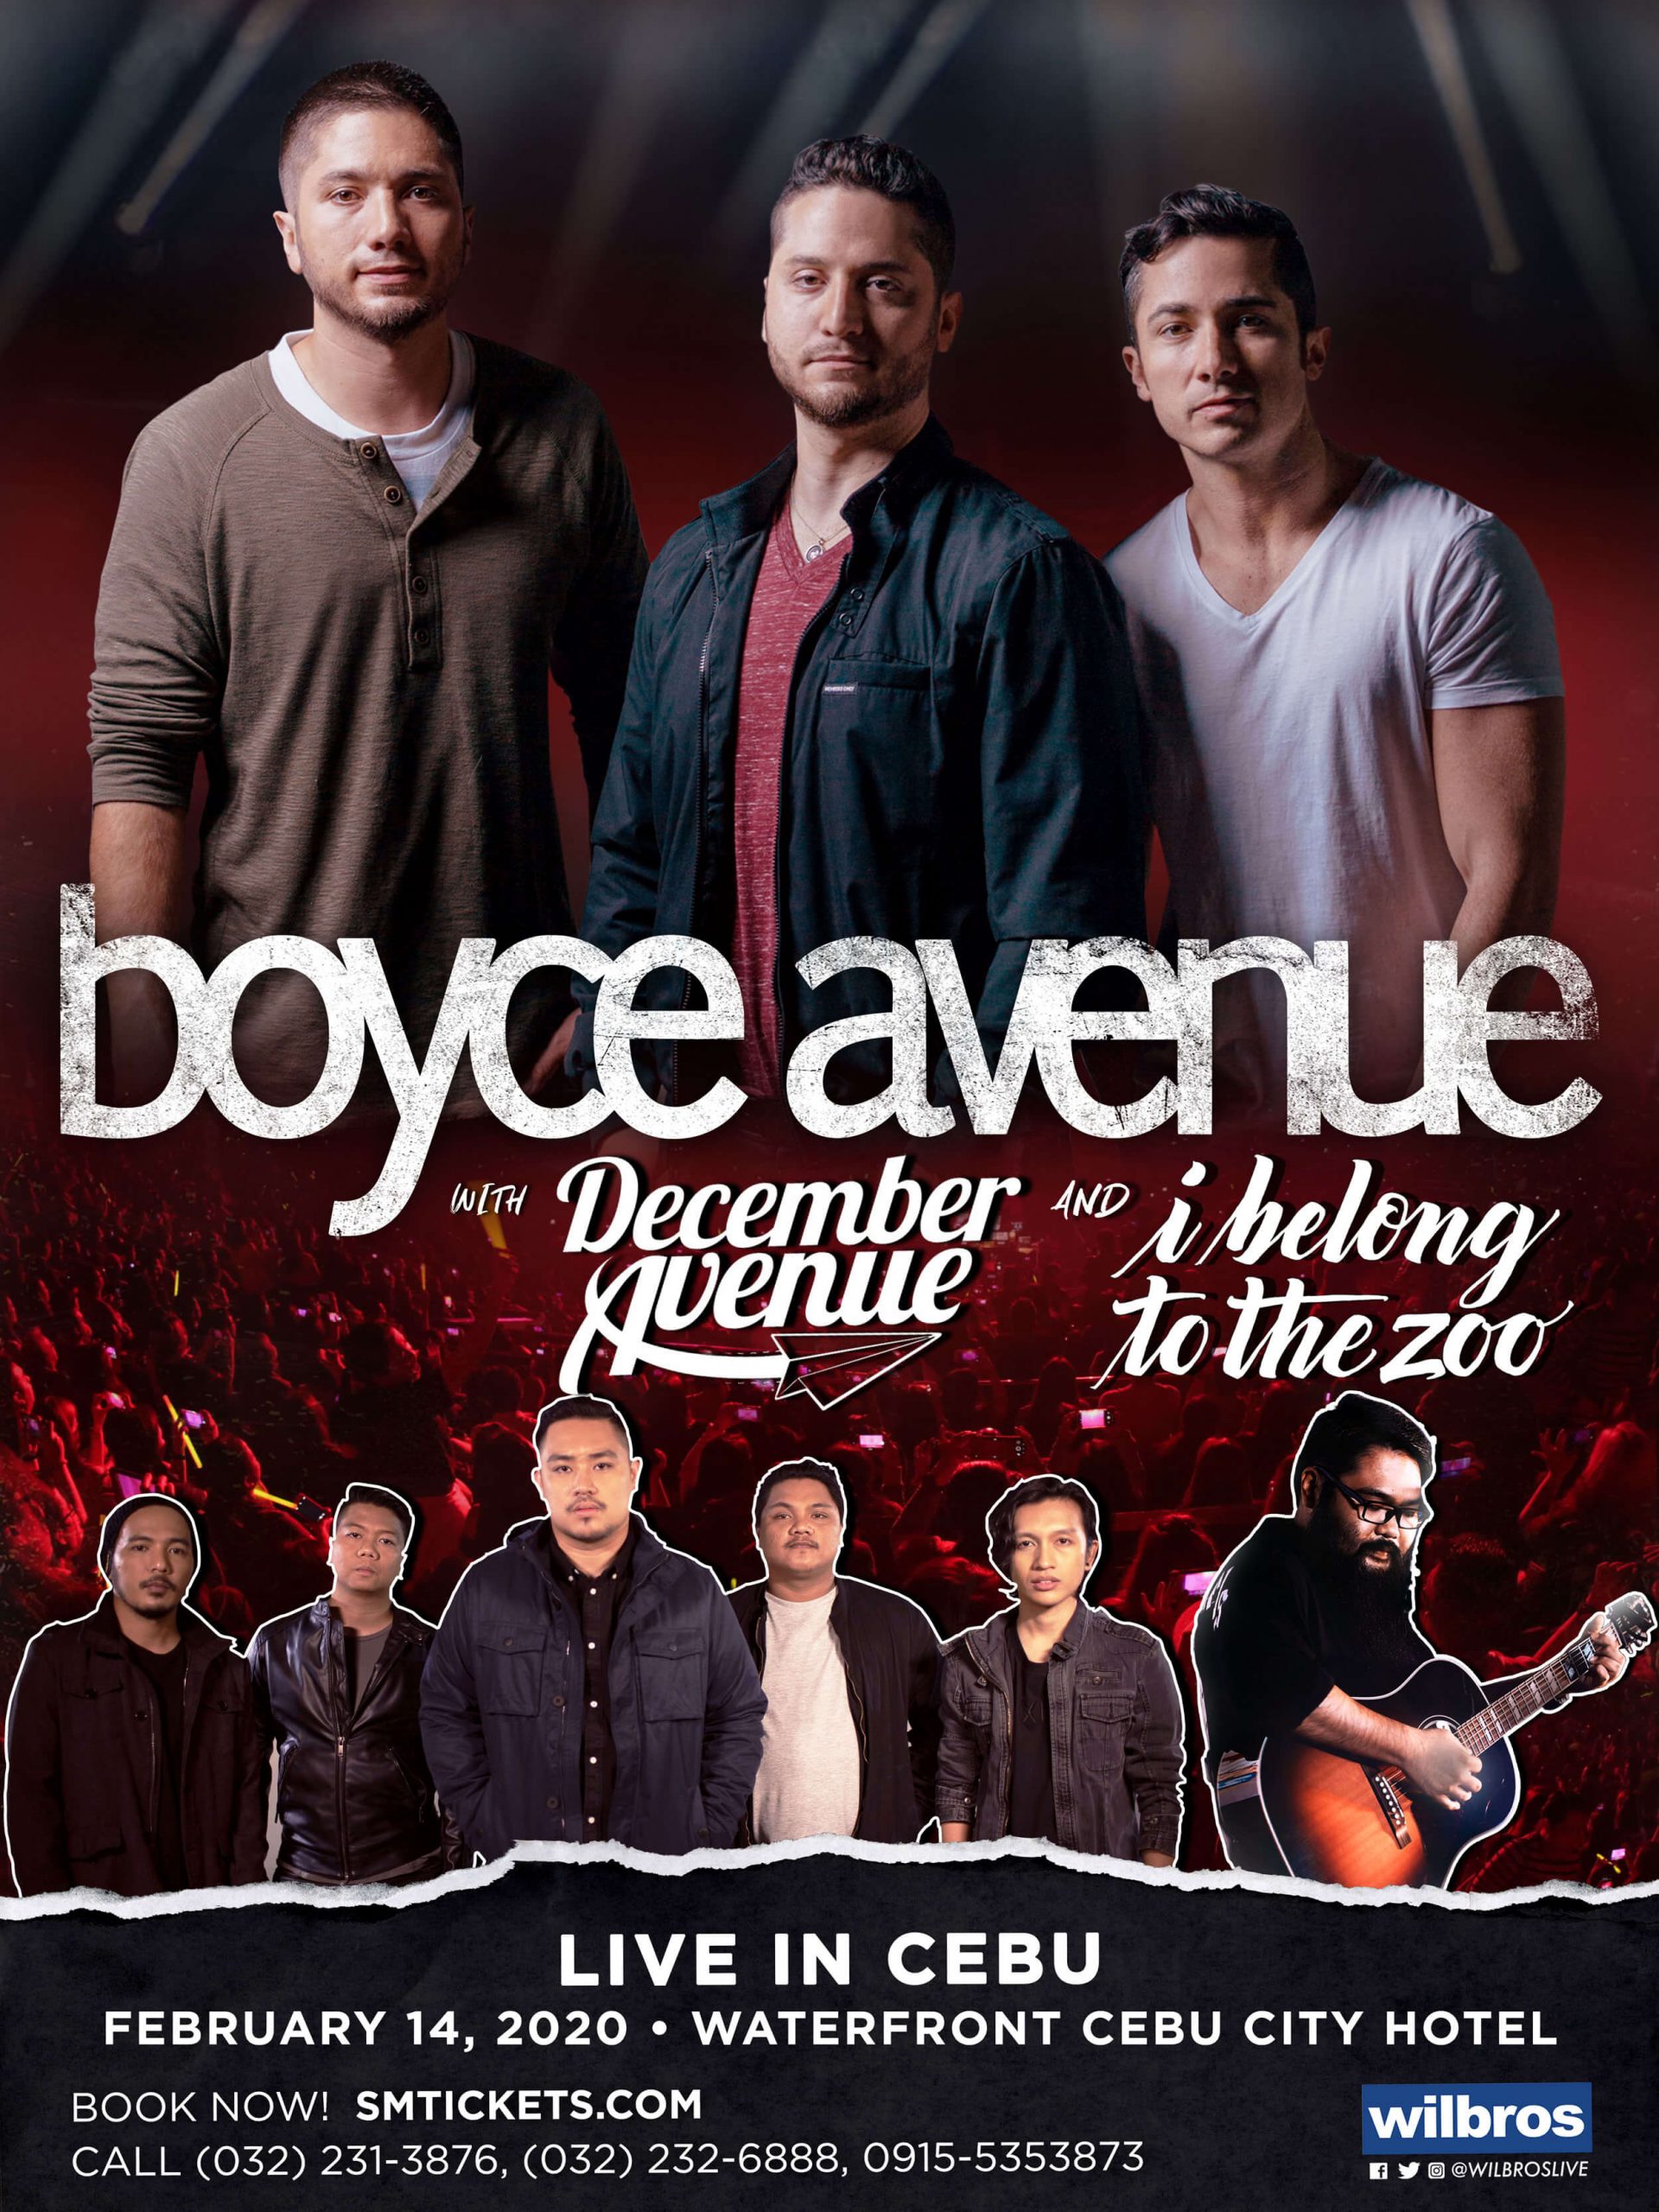 Boyce Avenue will be back in Cebu for a one-night Valentine’s Day concert on February 14 at the Waterfront Cebu City Hotel – Grand Ballroom.